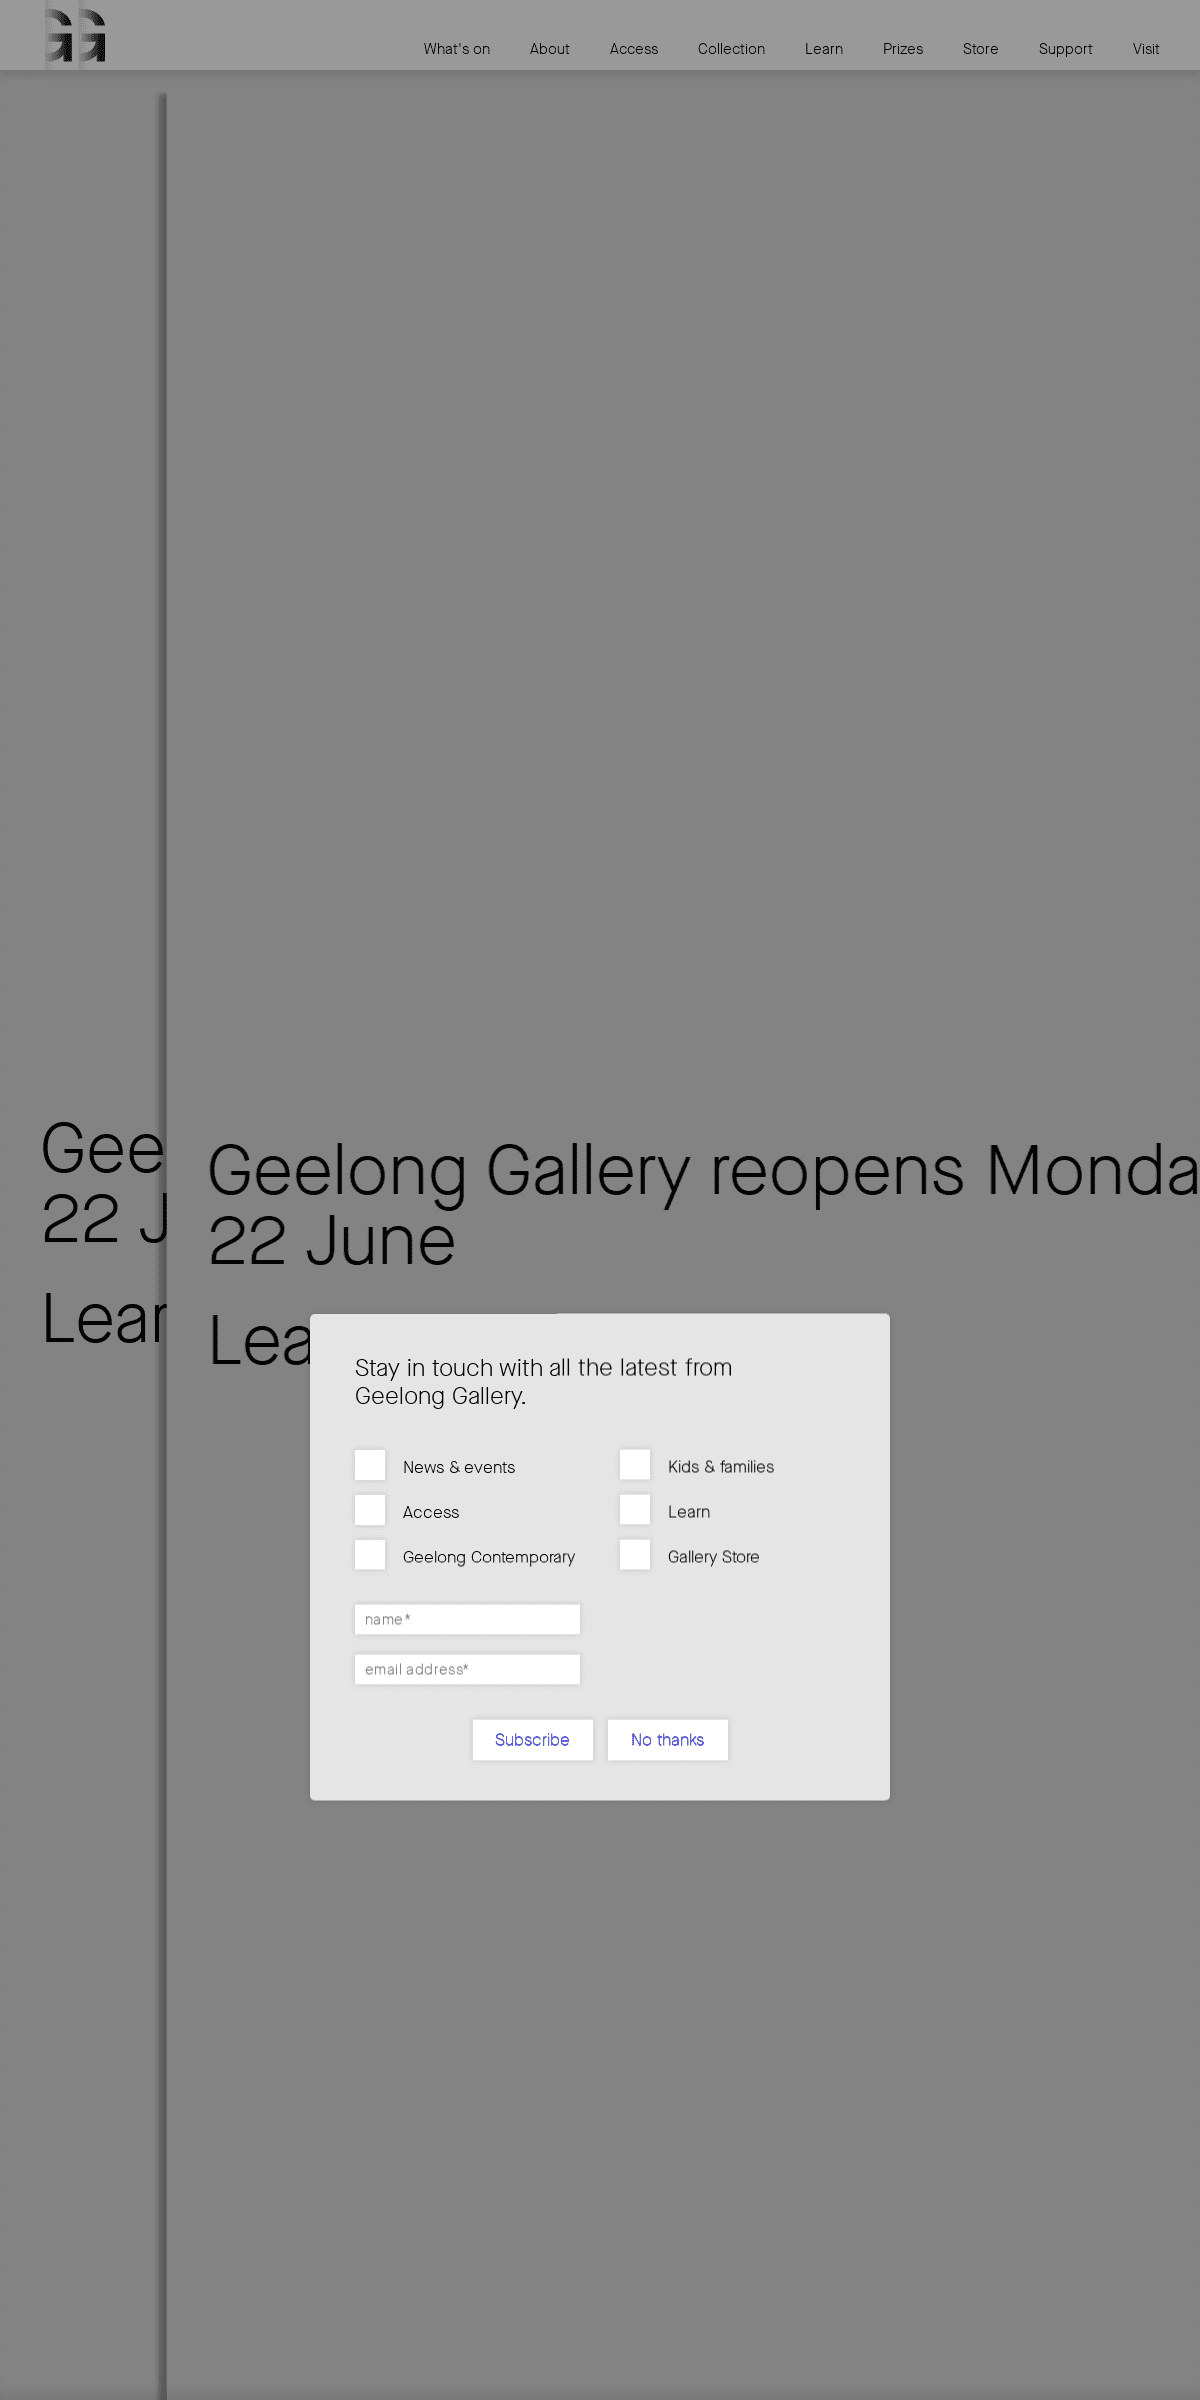 A complete backup of geelonggallery.org.au